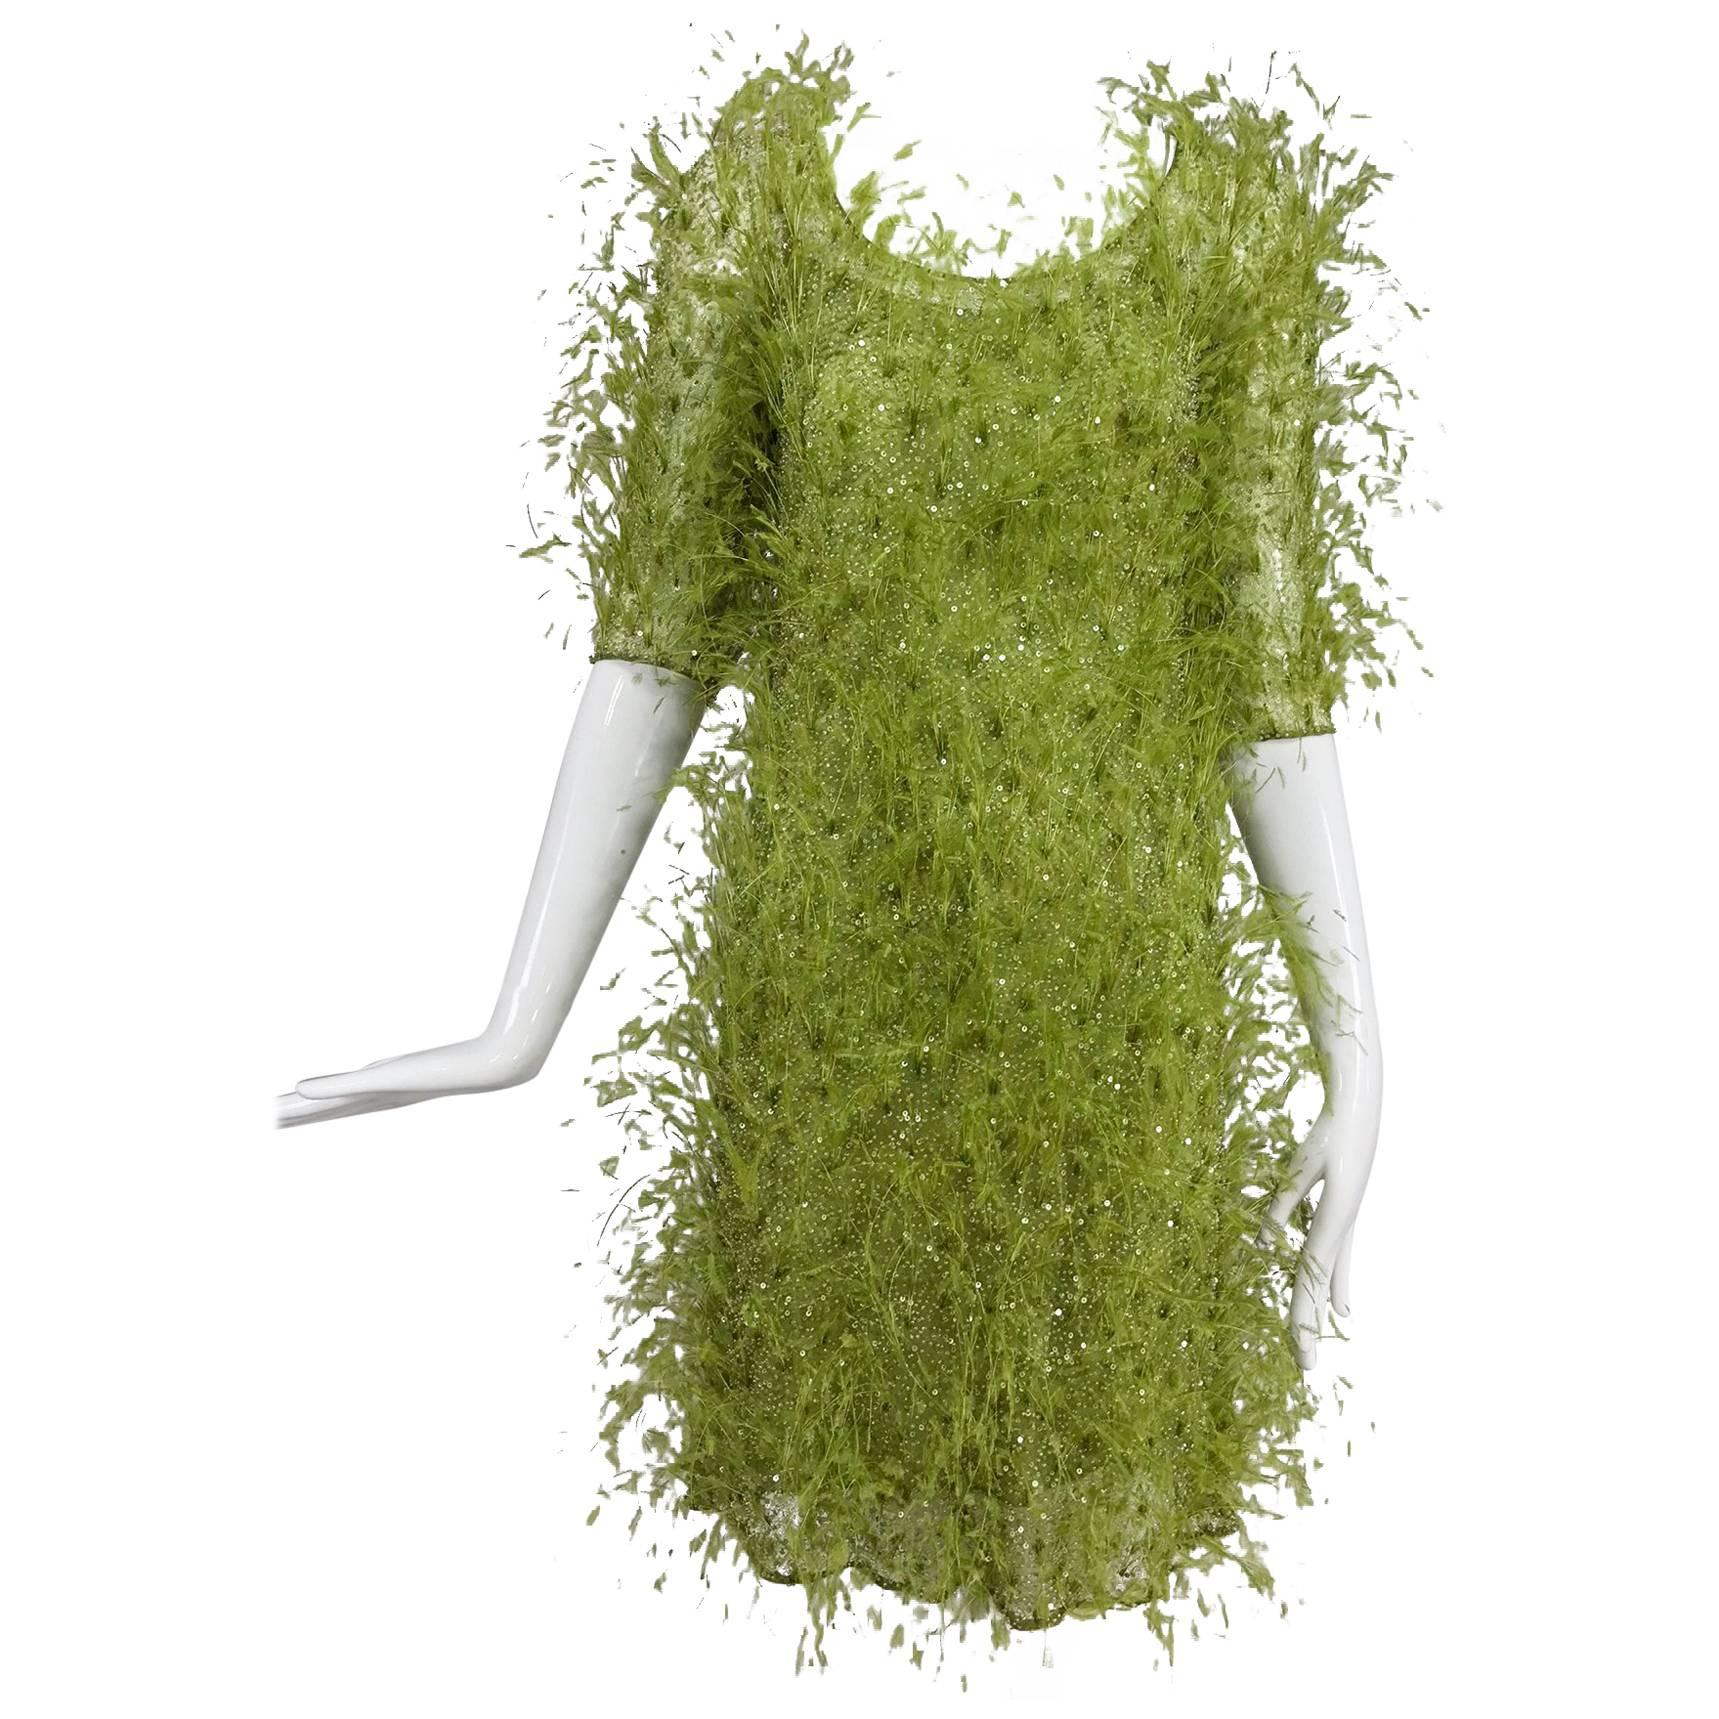 Chado Ralph Rucci spring green chiffon feather and sequin dress